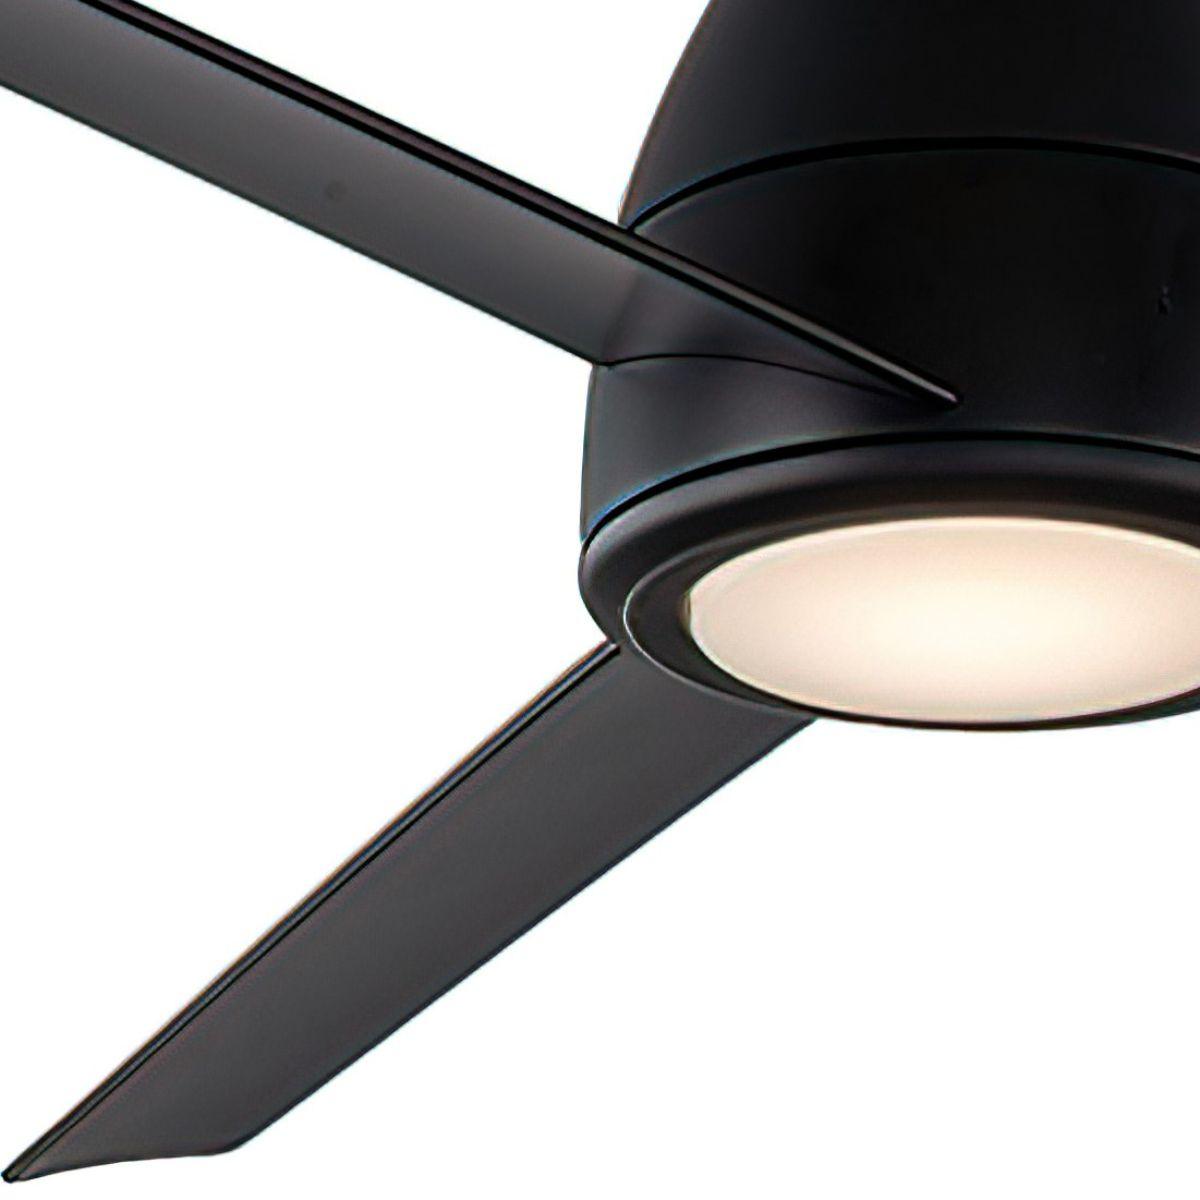 Tip-Top 52 Inch Modern Outdoor Smart Ceiling Fan With 3500K LED And Remote